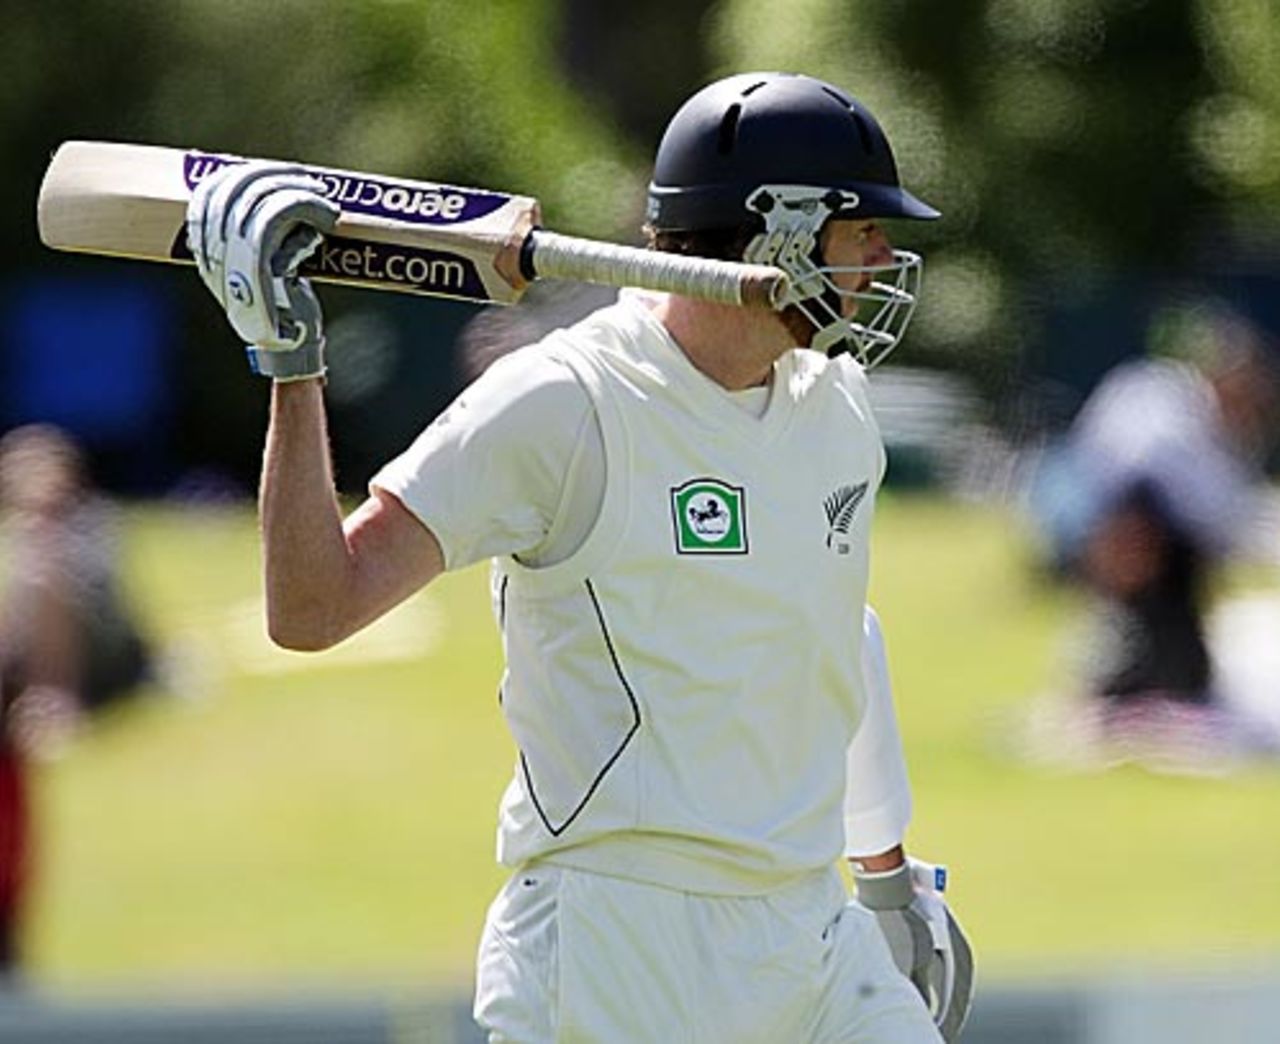 Iain O'Brien clearly isn't happy after being dismissed, New Zealand v Pakistan, 1st Test, Dunedin, 5th day, November 28, 2009